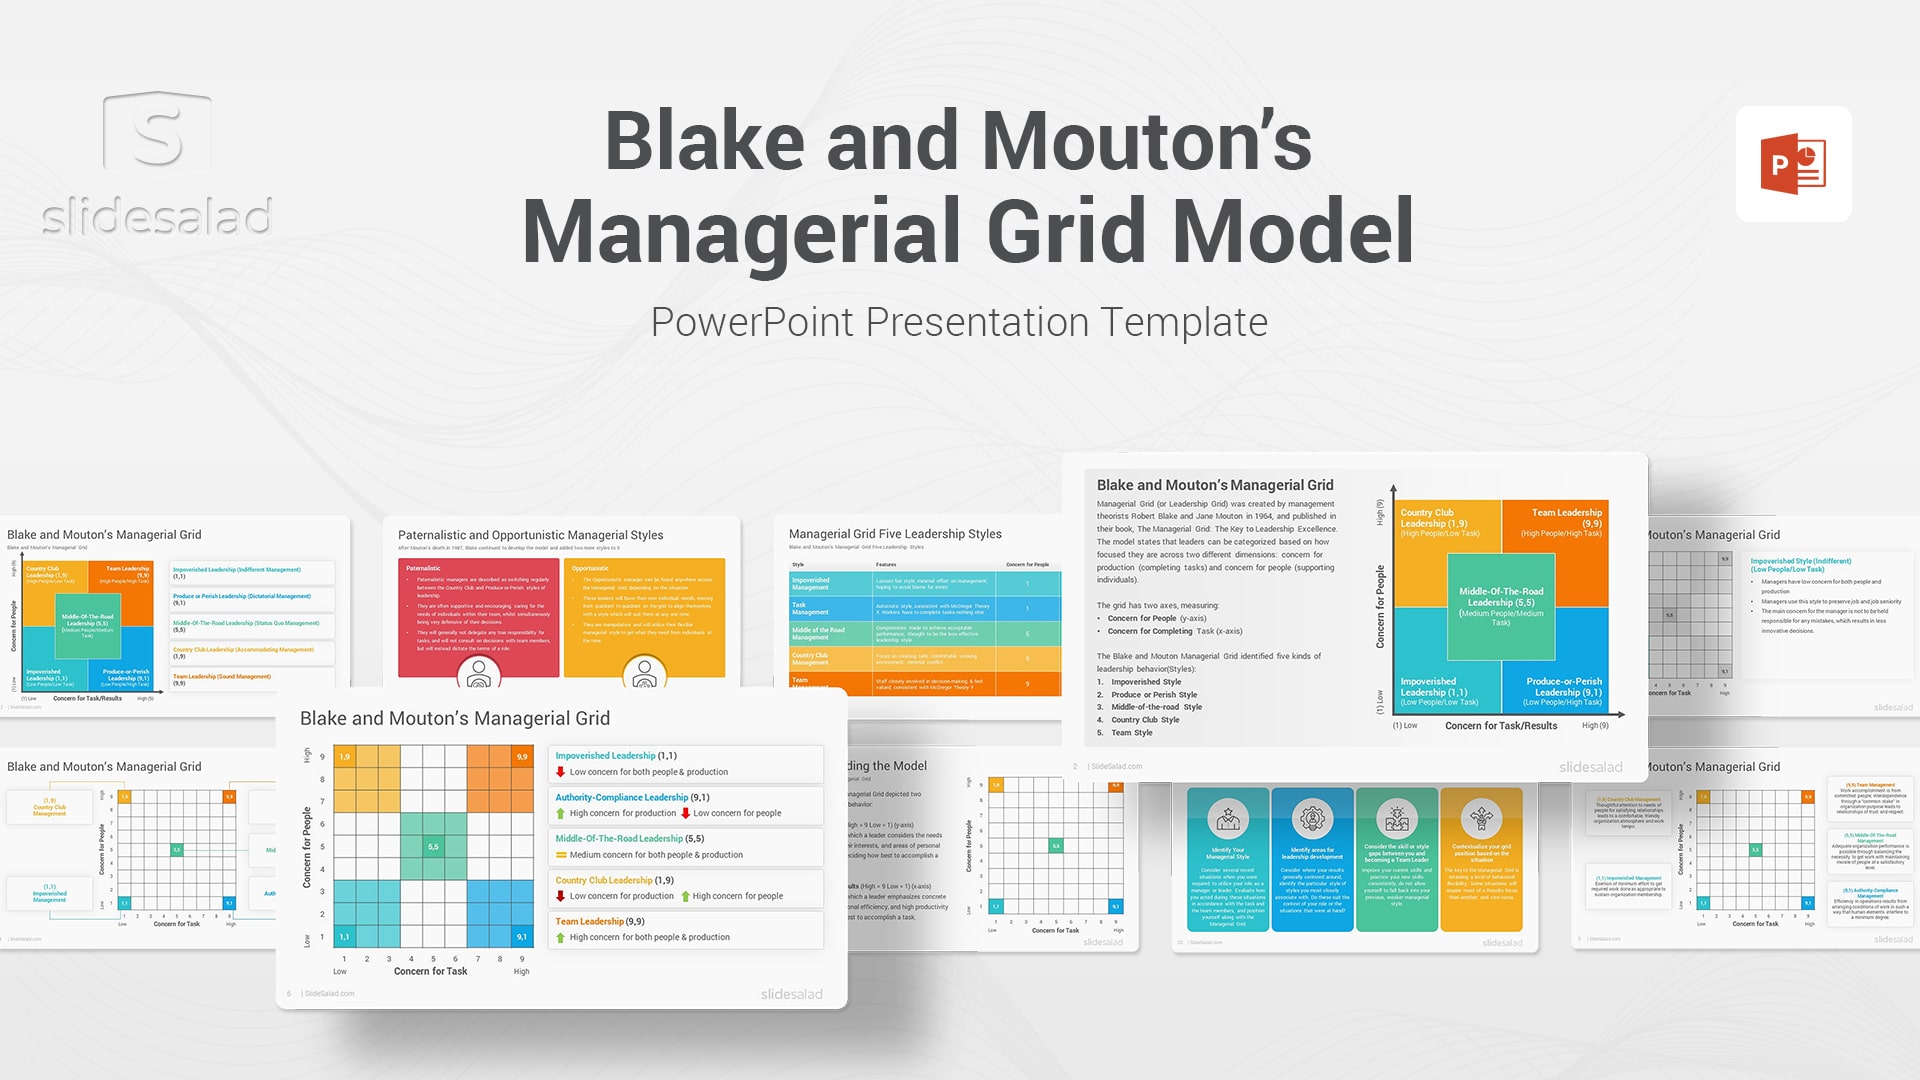 Blake-Mouton Managerial Grid Model PowerPoint Template - Business Leadership PowerPoint Templates for Download